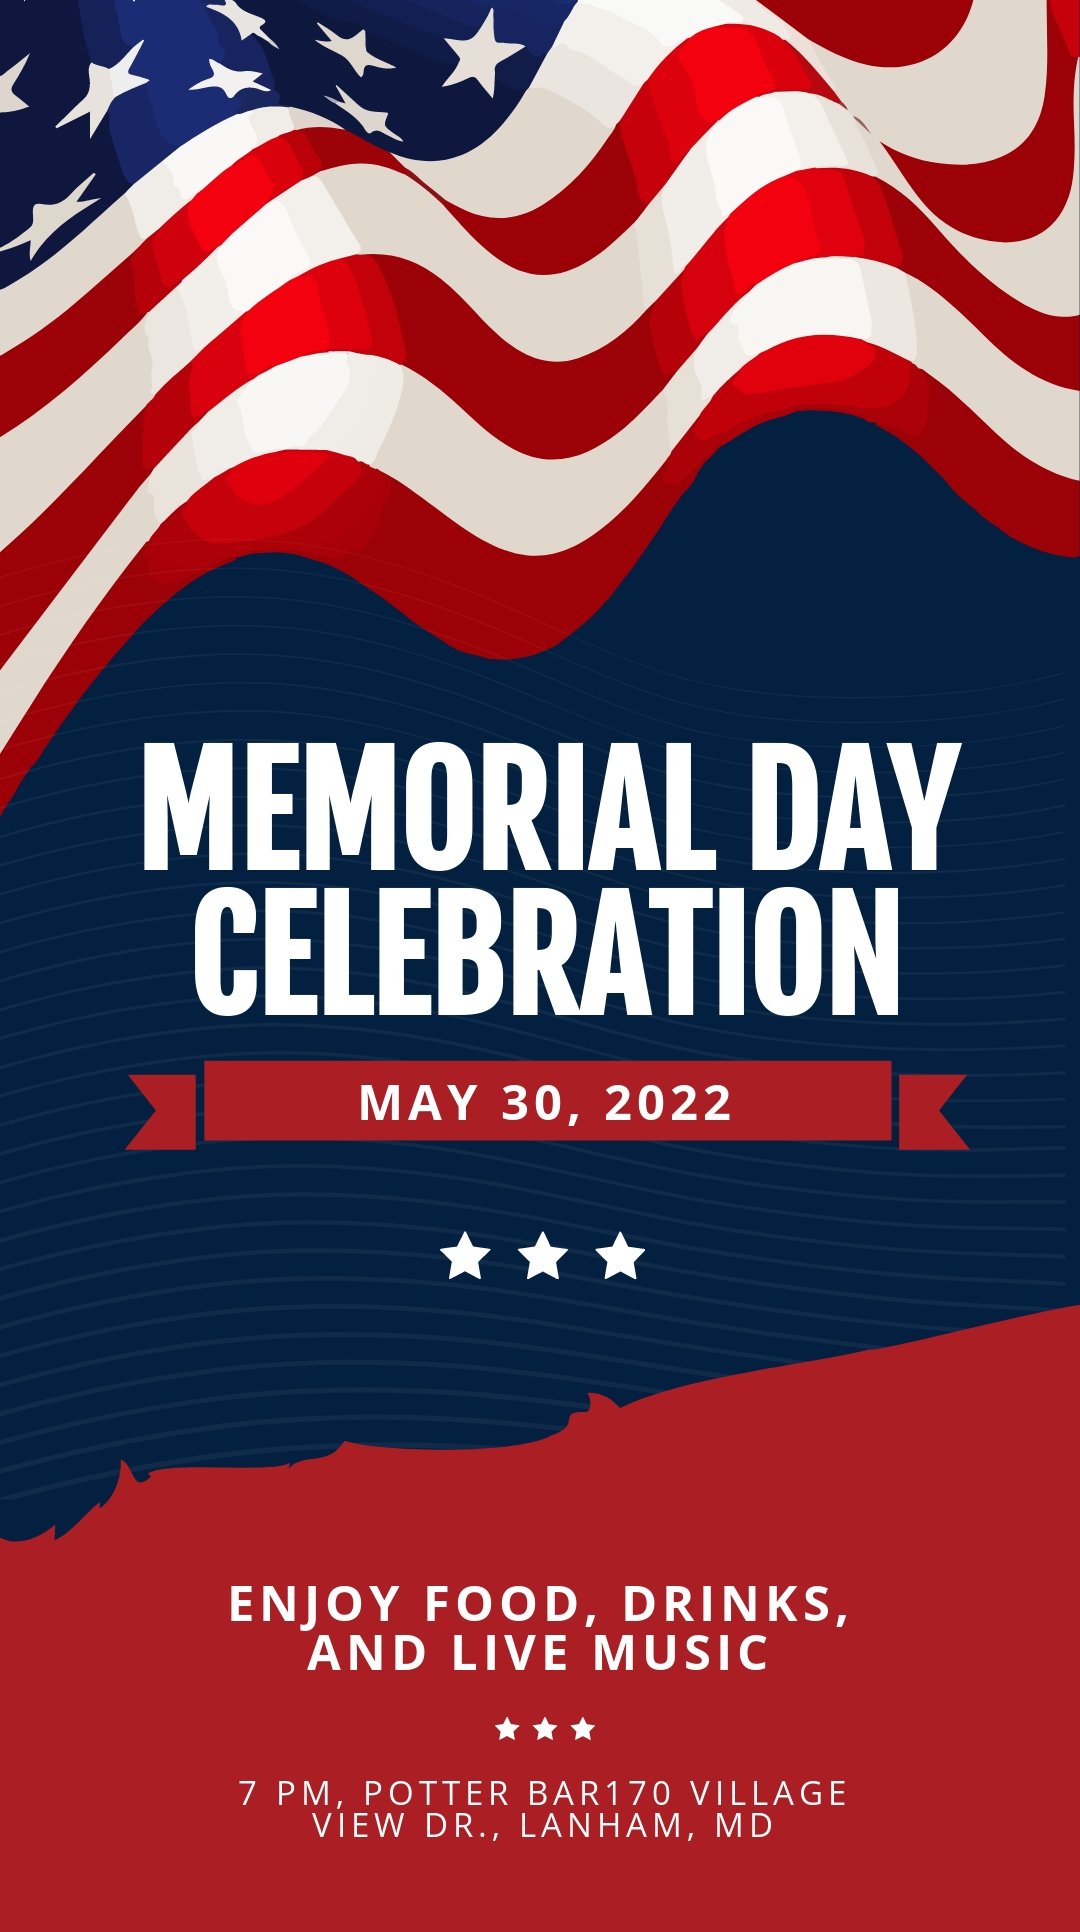 Free Memorial Day Snapchat Geofilter Template.jpe